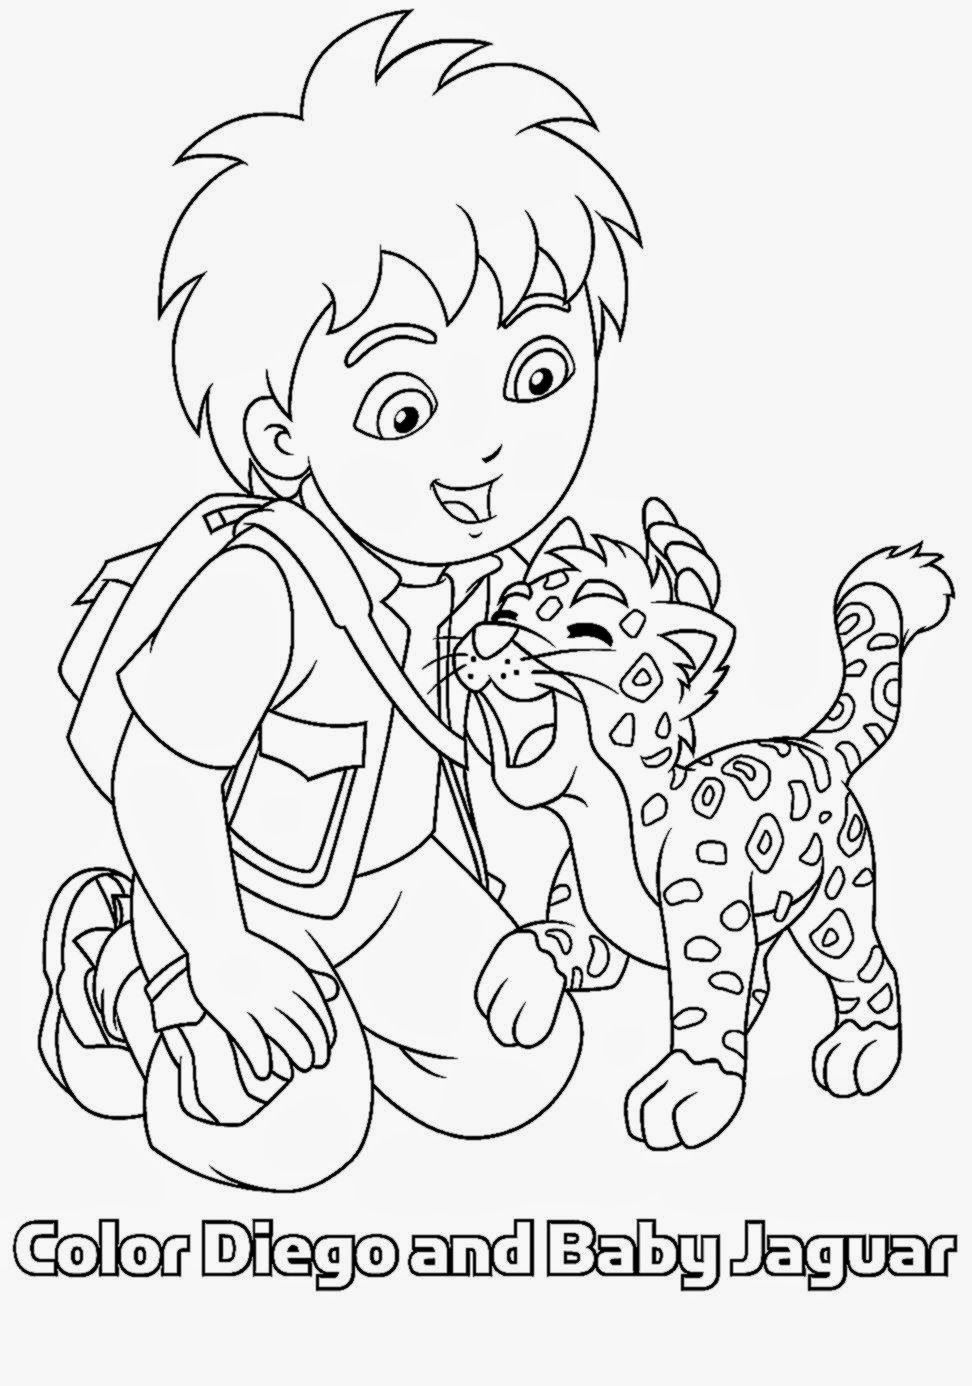 Diego Coloring Book | Free Coloring Pages